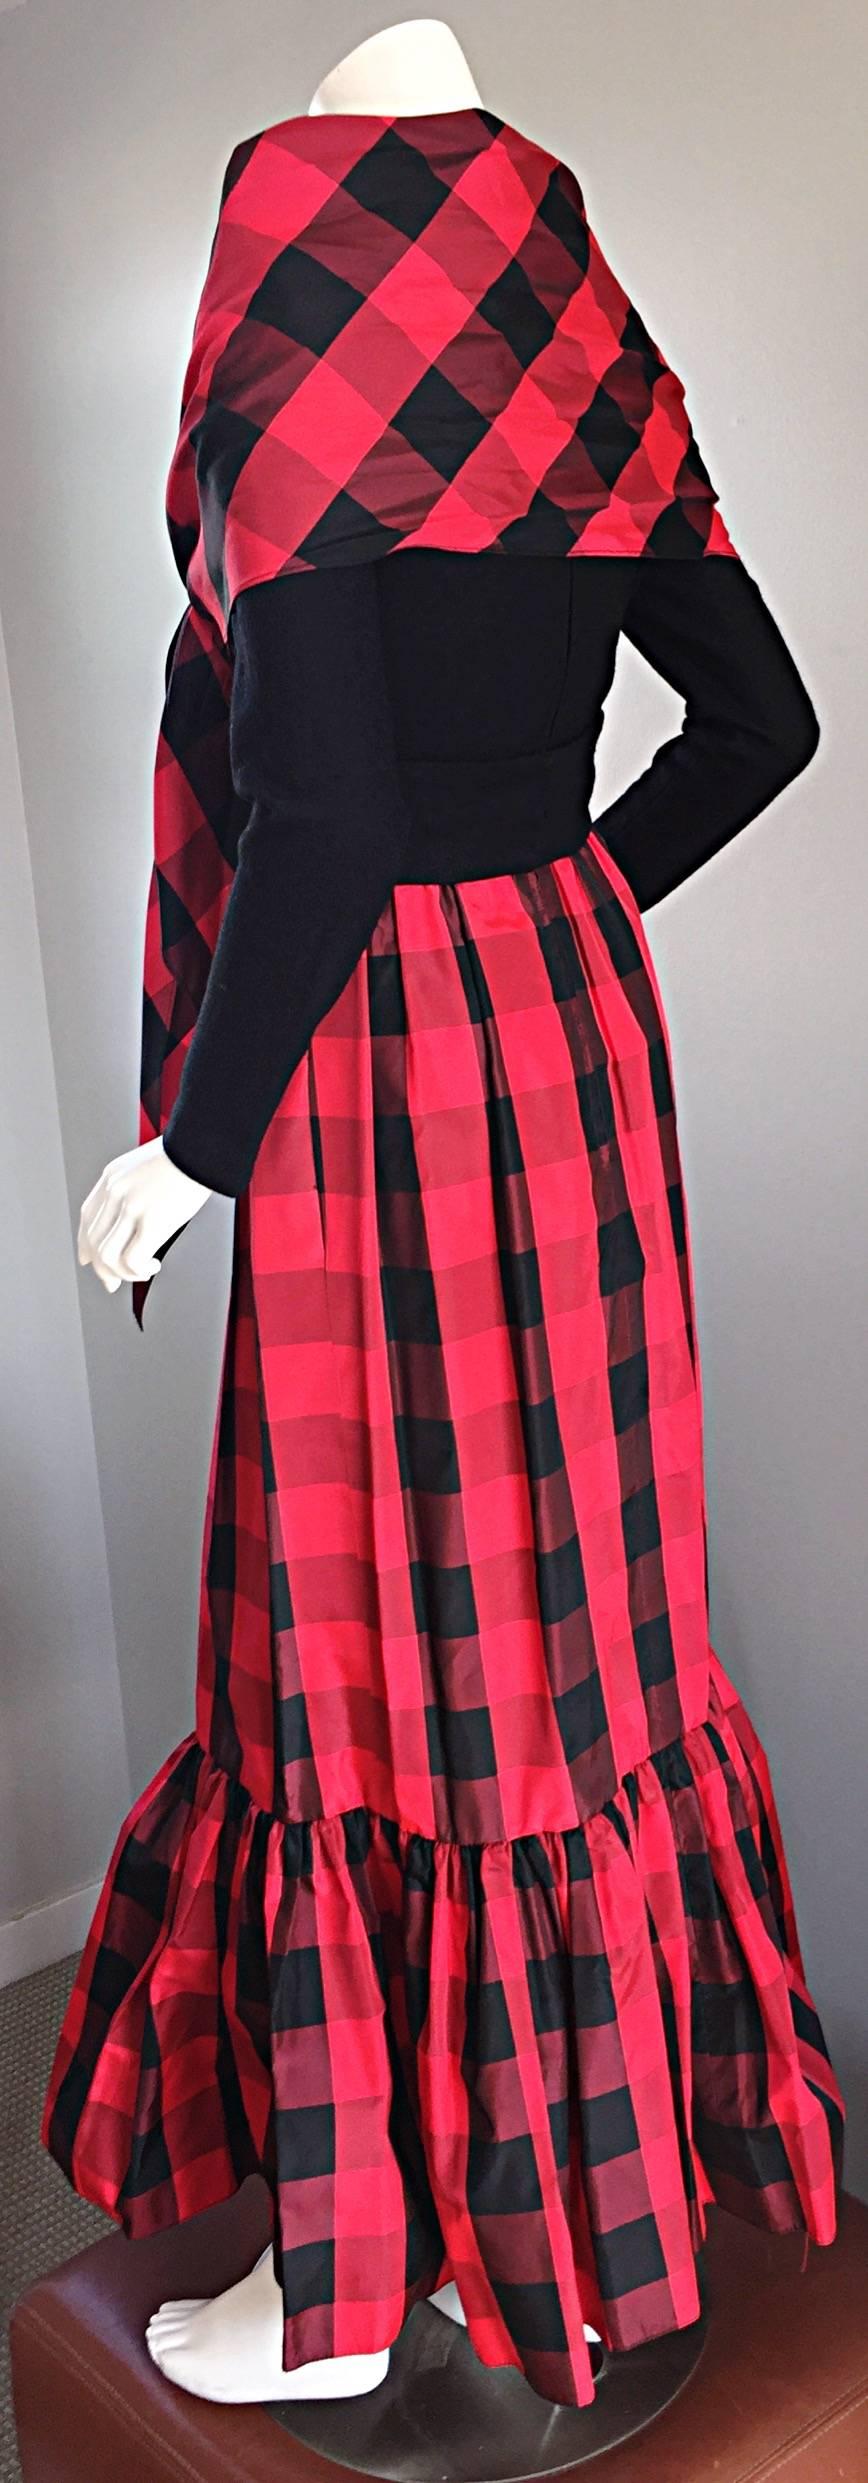 red and black checkered dress